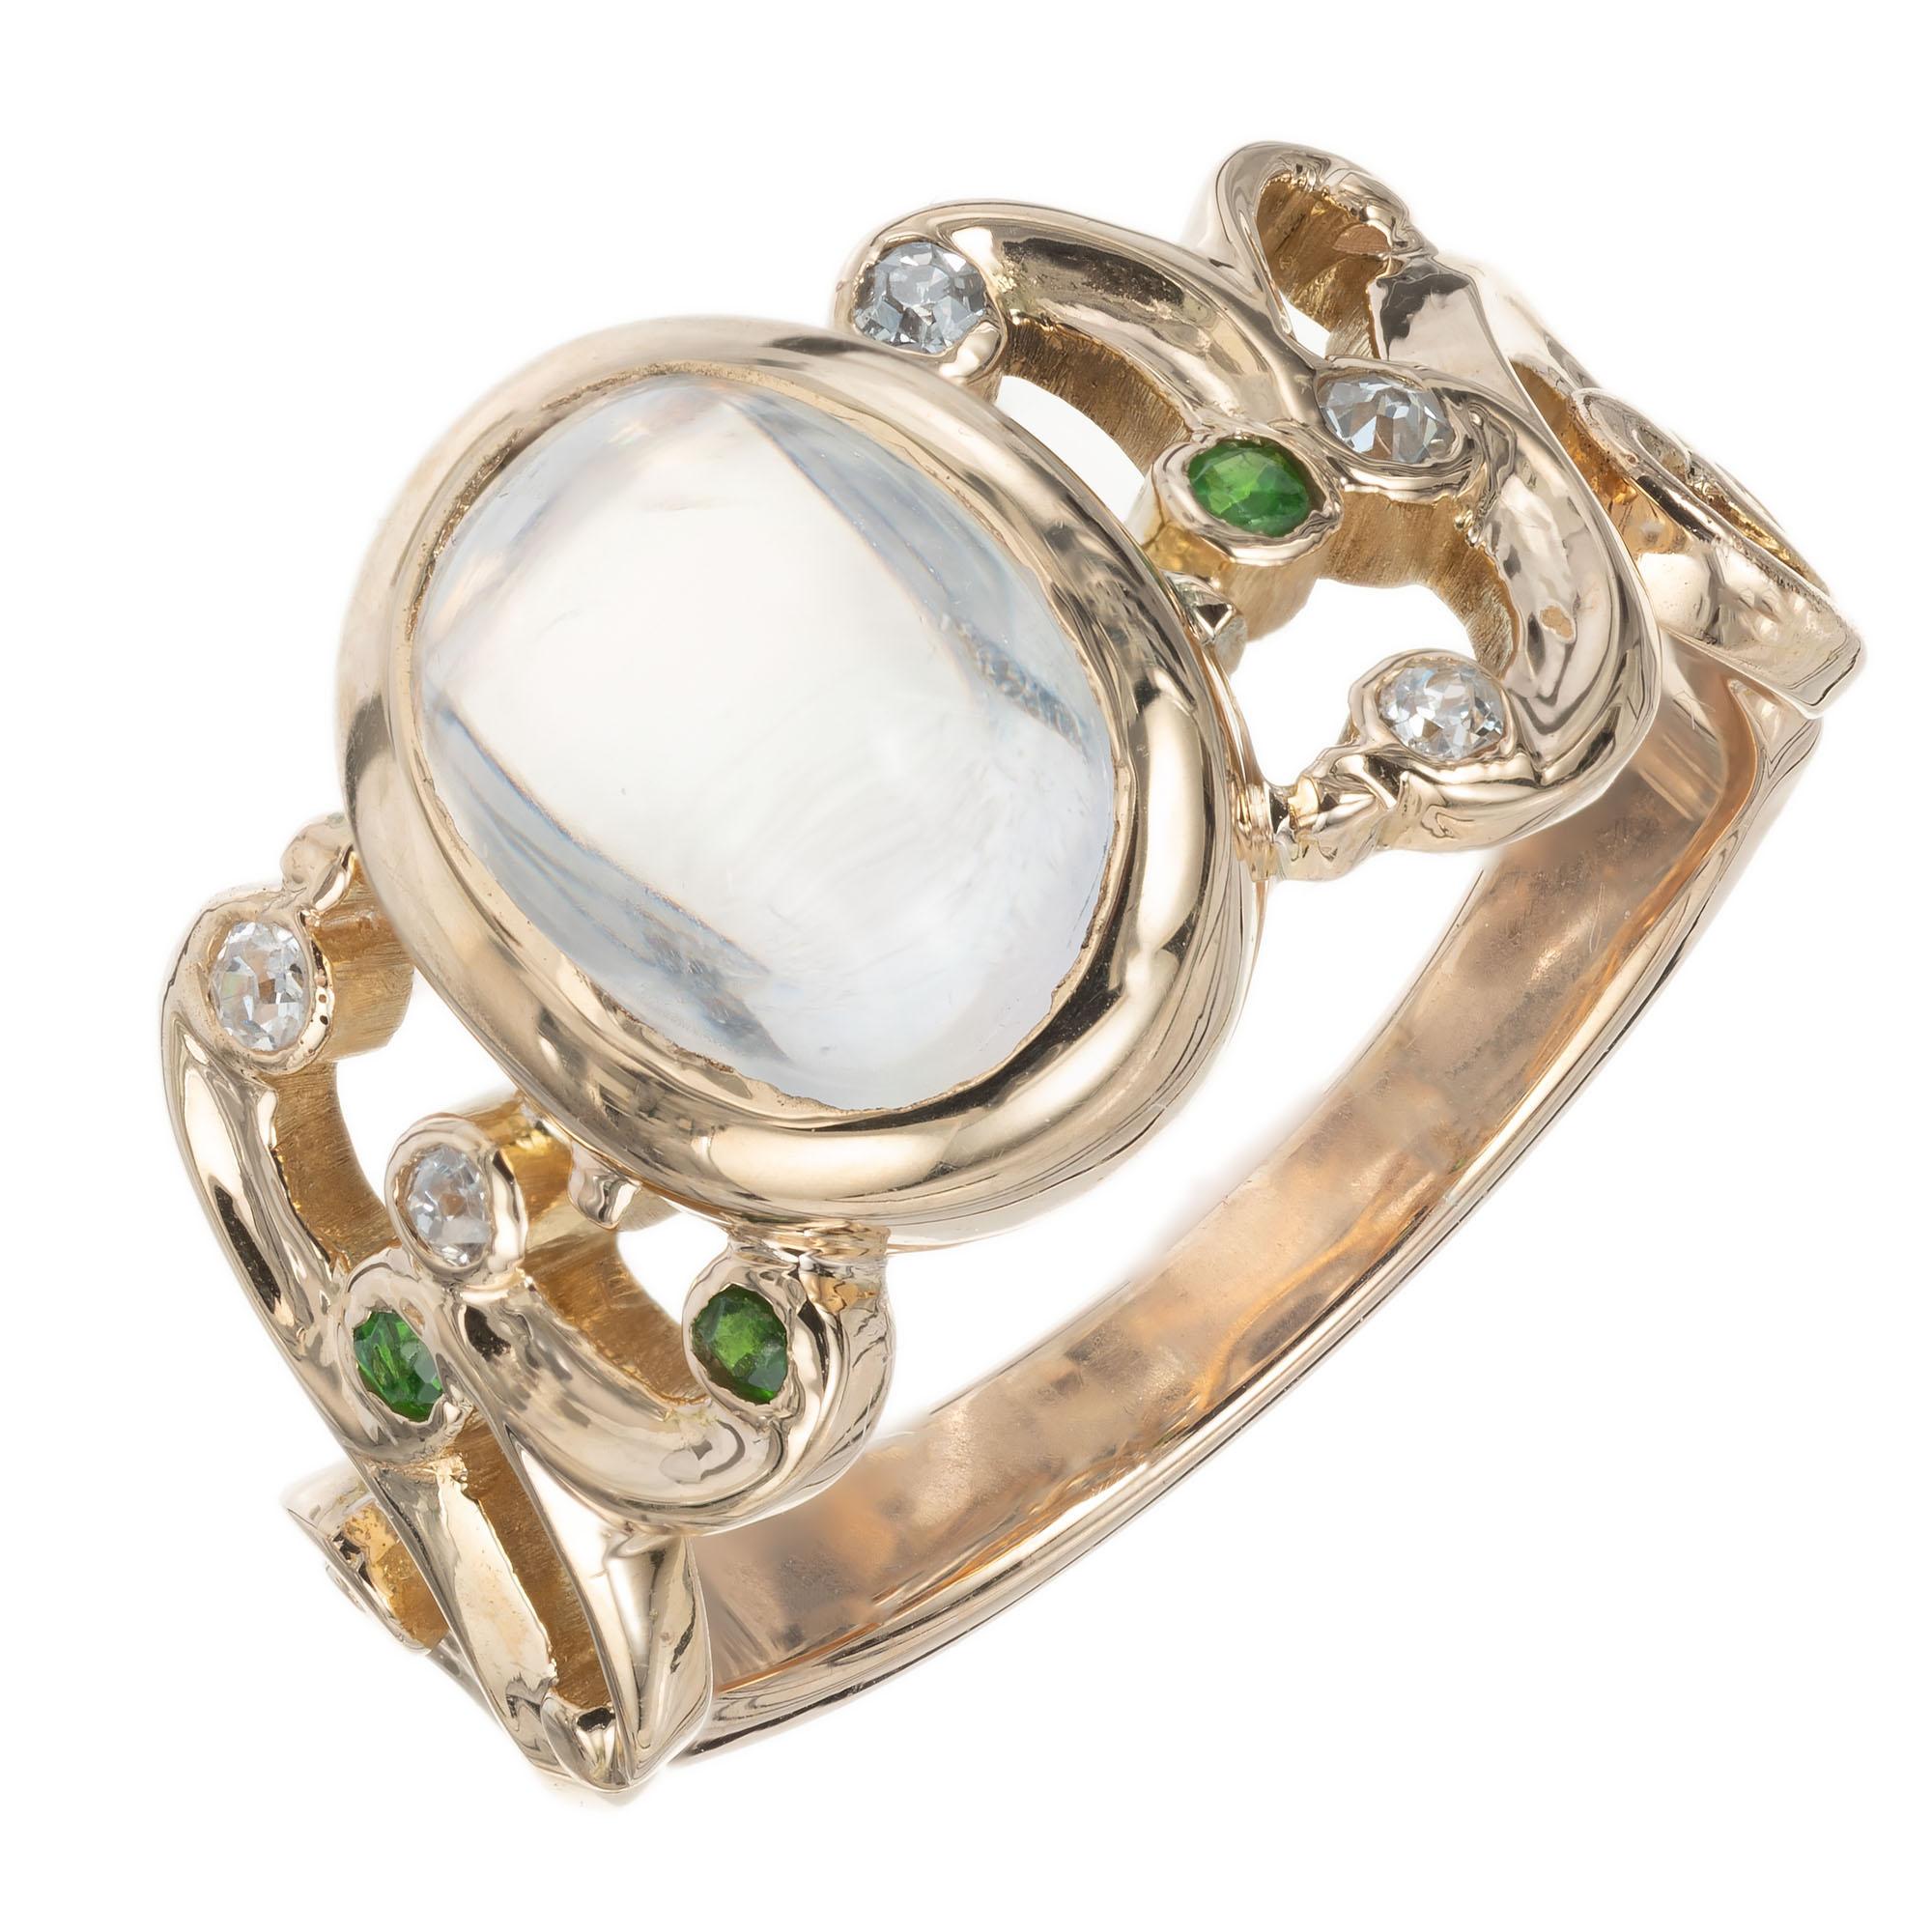 1900's Victorian moonstone, diamond and garnet ring. 3.30ct oval center stone, accented with 3 green demantoid garnets and 5 old European cut diamonds in 14k yellow gold setting. 

1 oval cabochon clear with blue essence moonstone, VS approx.